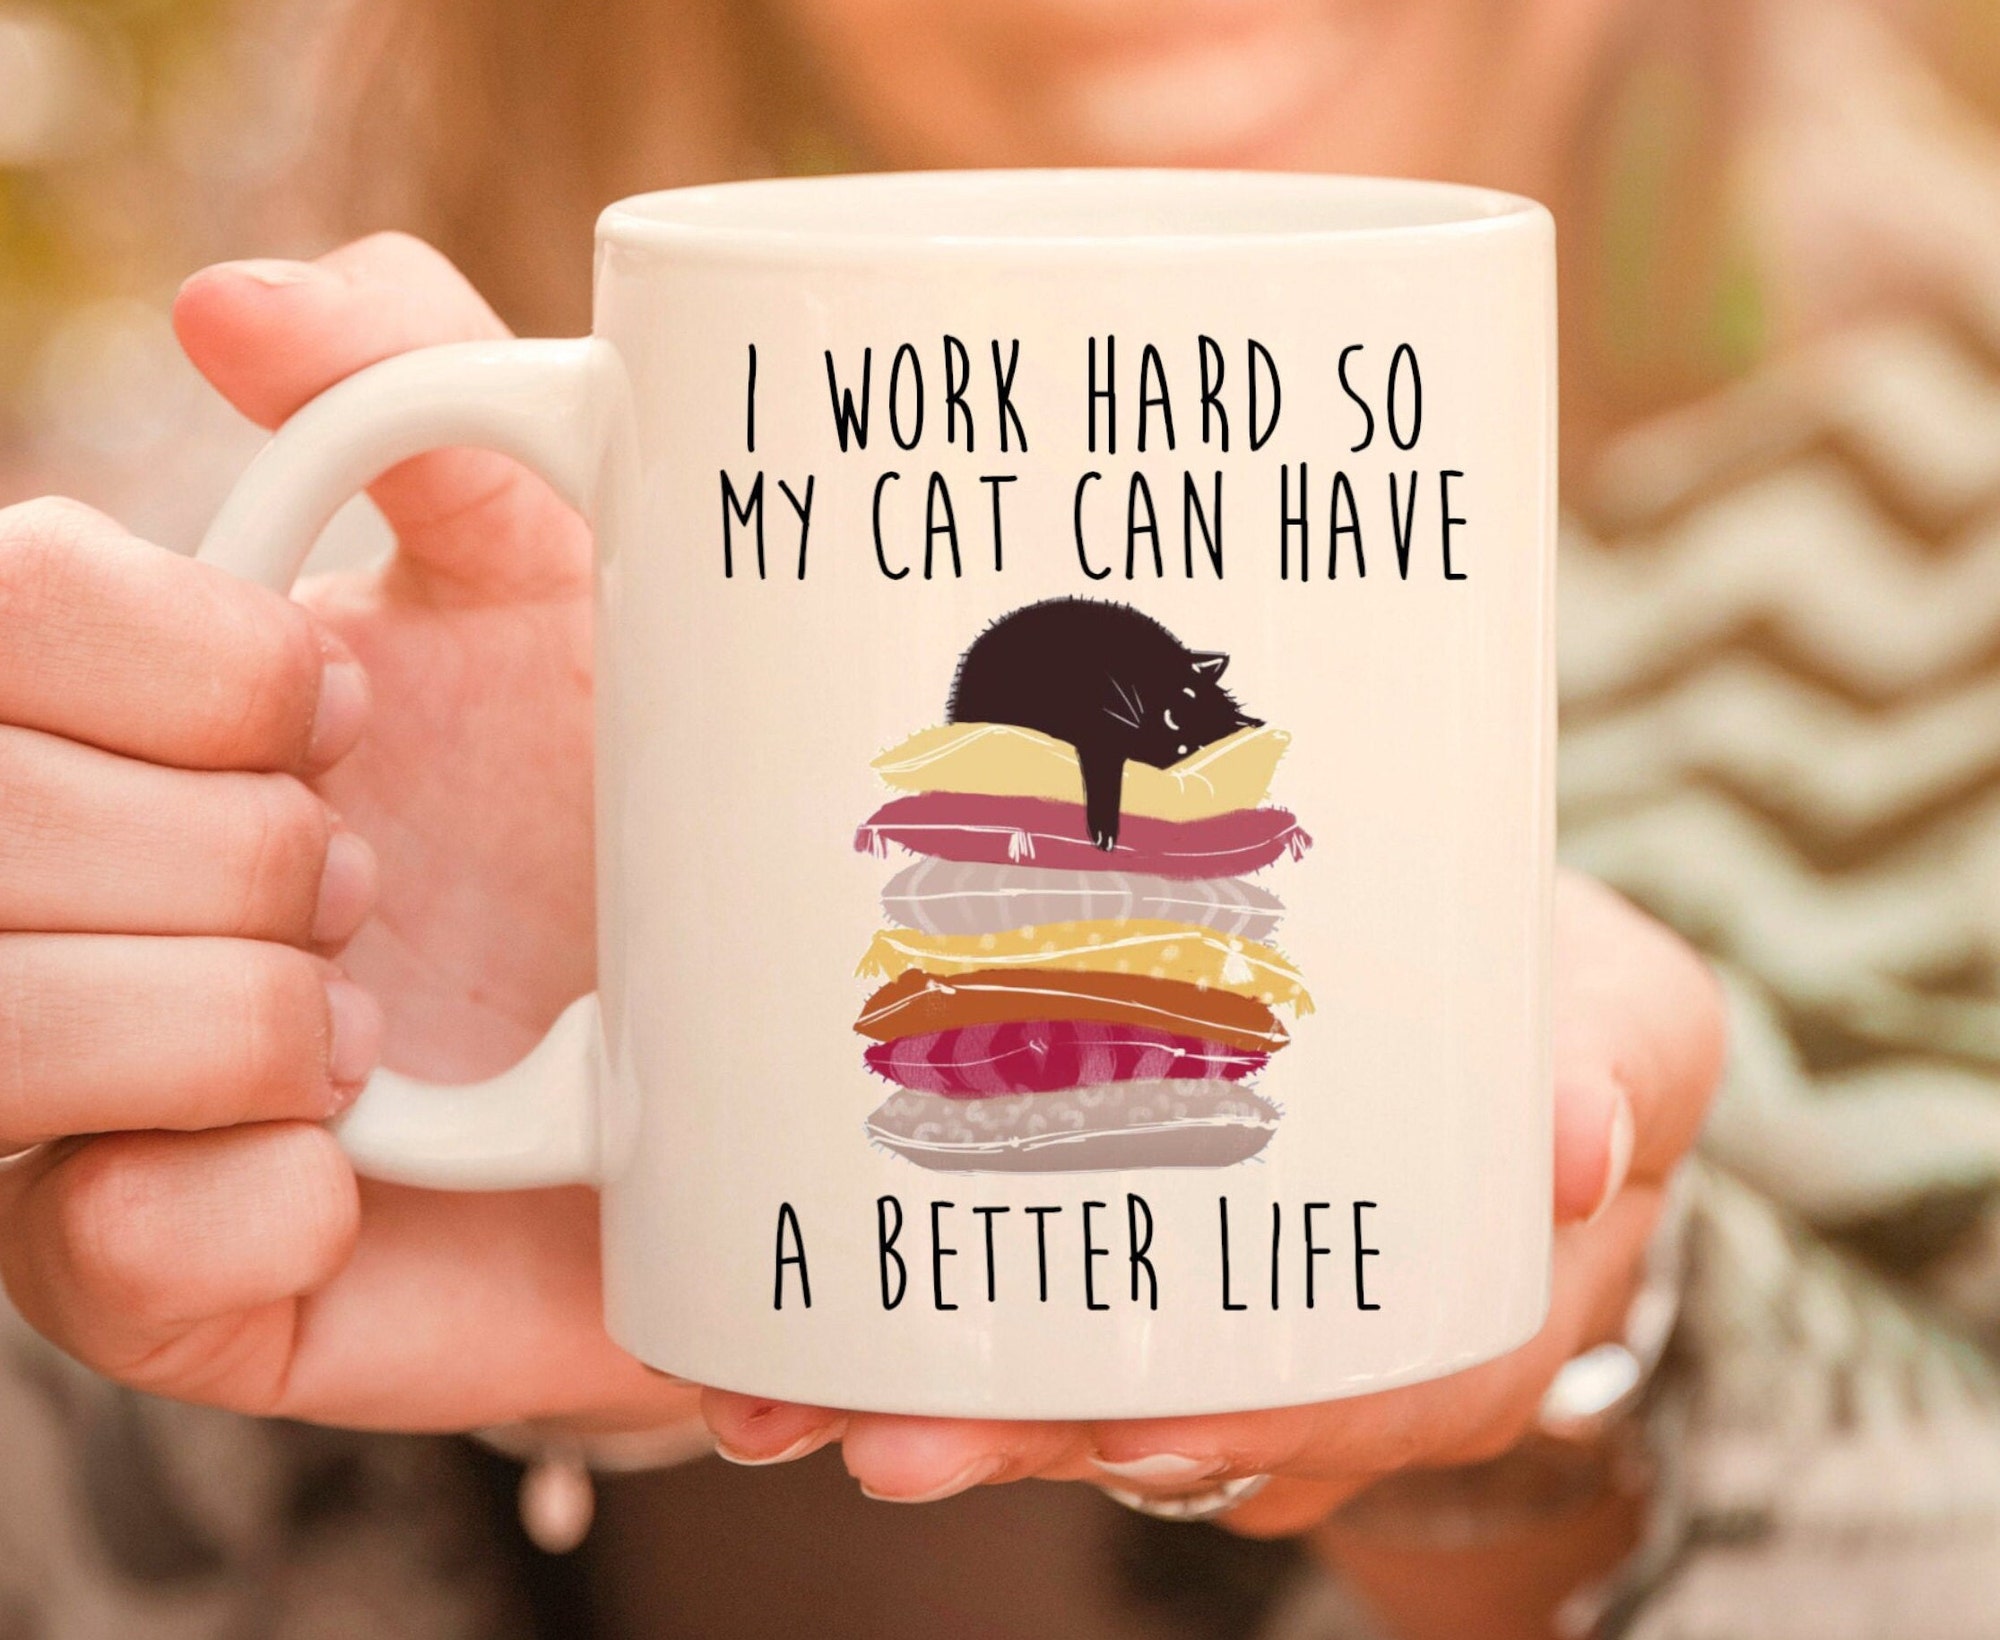 I Work Hard So My Cat Can Have a better Life Mug